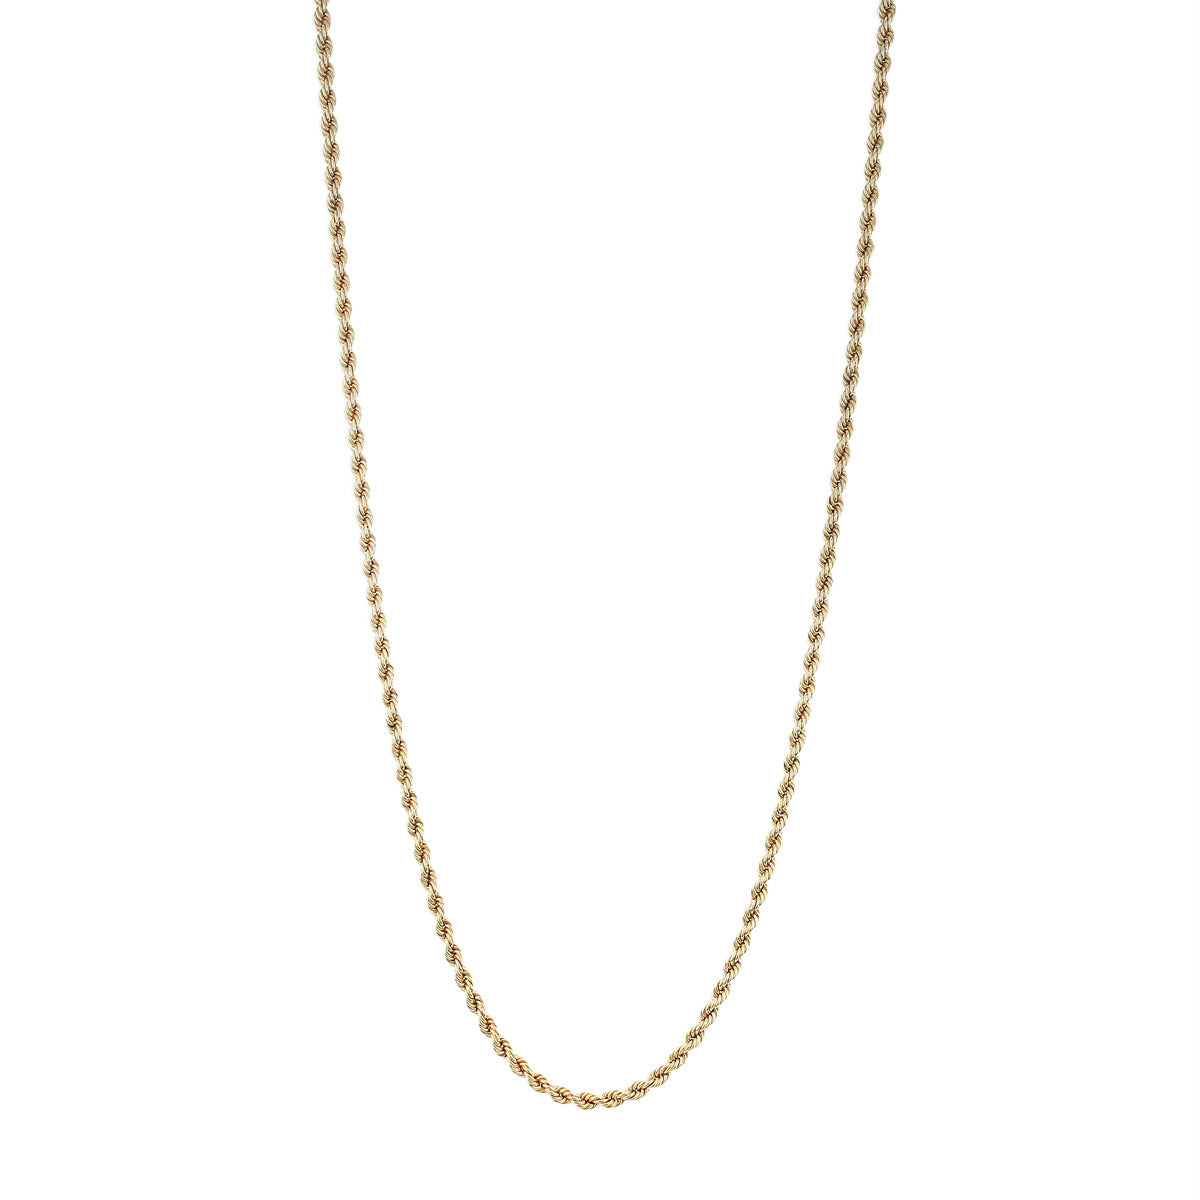 14K Solid Gold Rope Necklace | Couple's Chain Necklaces for Men in 14K Gold